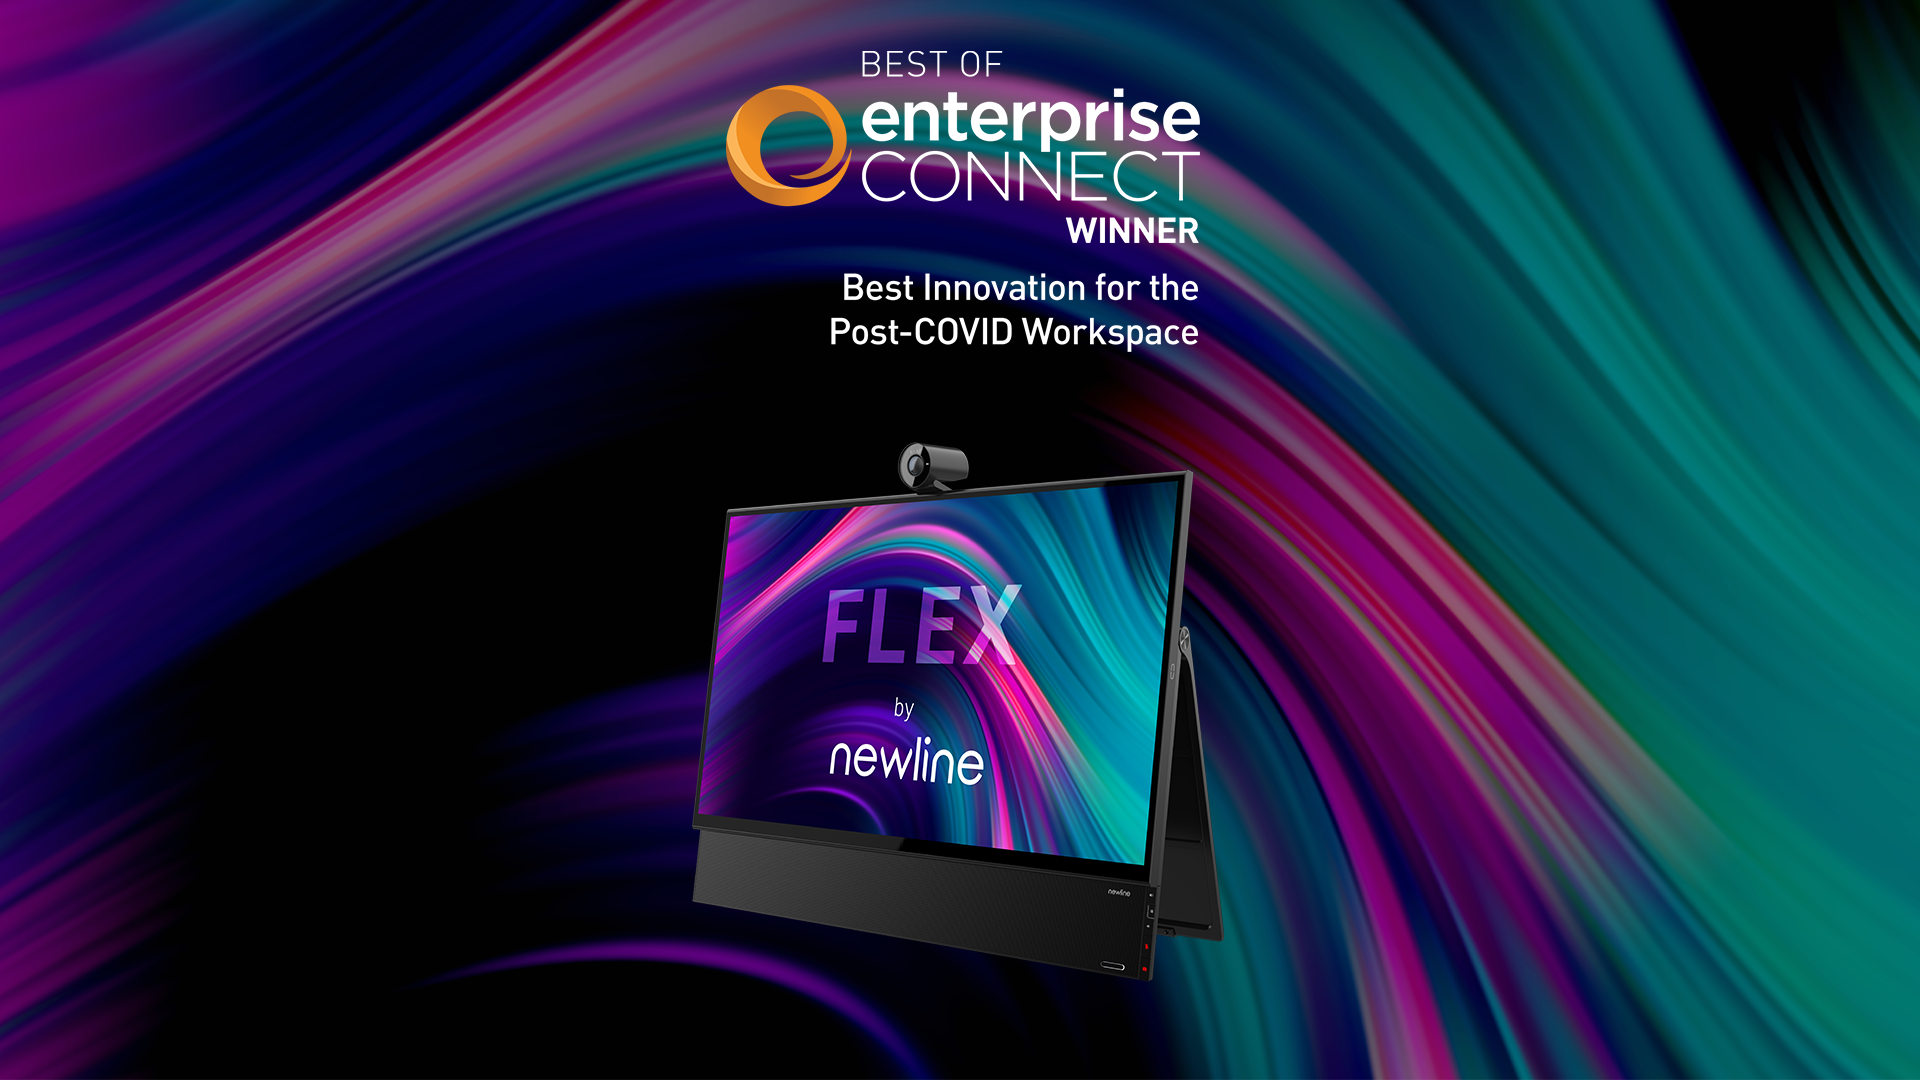 You are currently viewing Newline Wins Best of Enterprise Connect